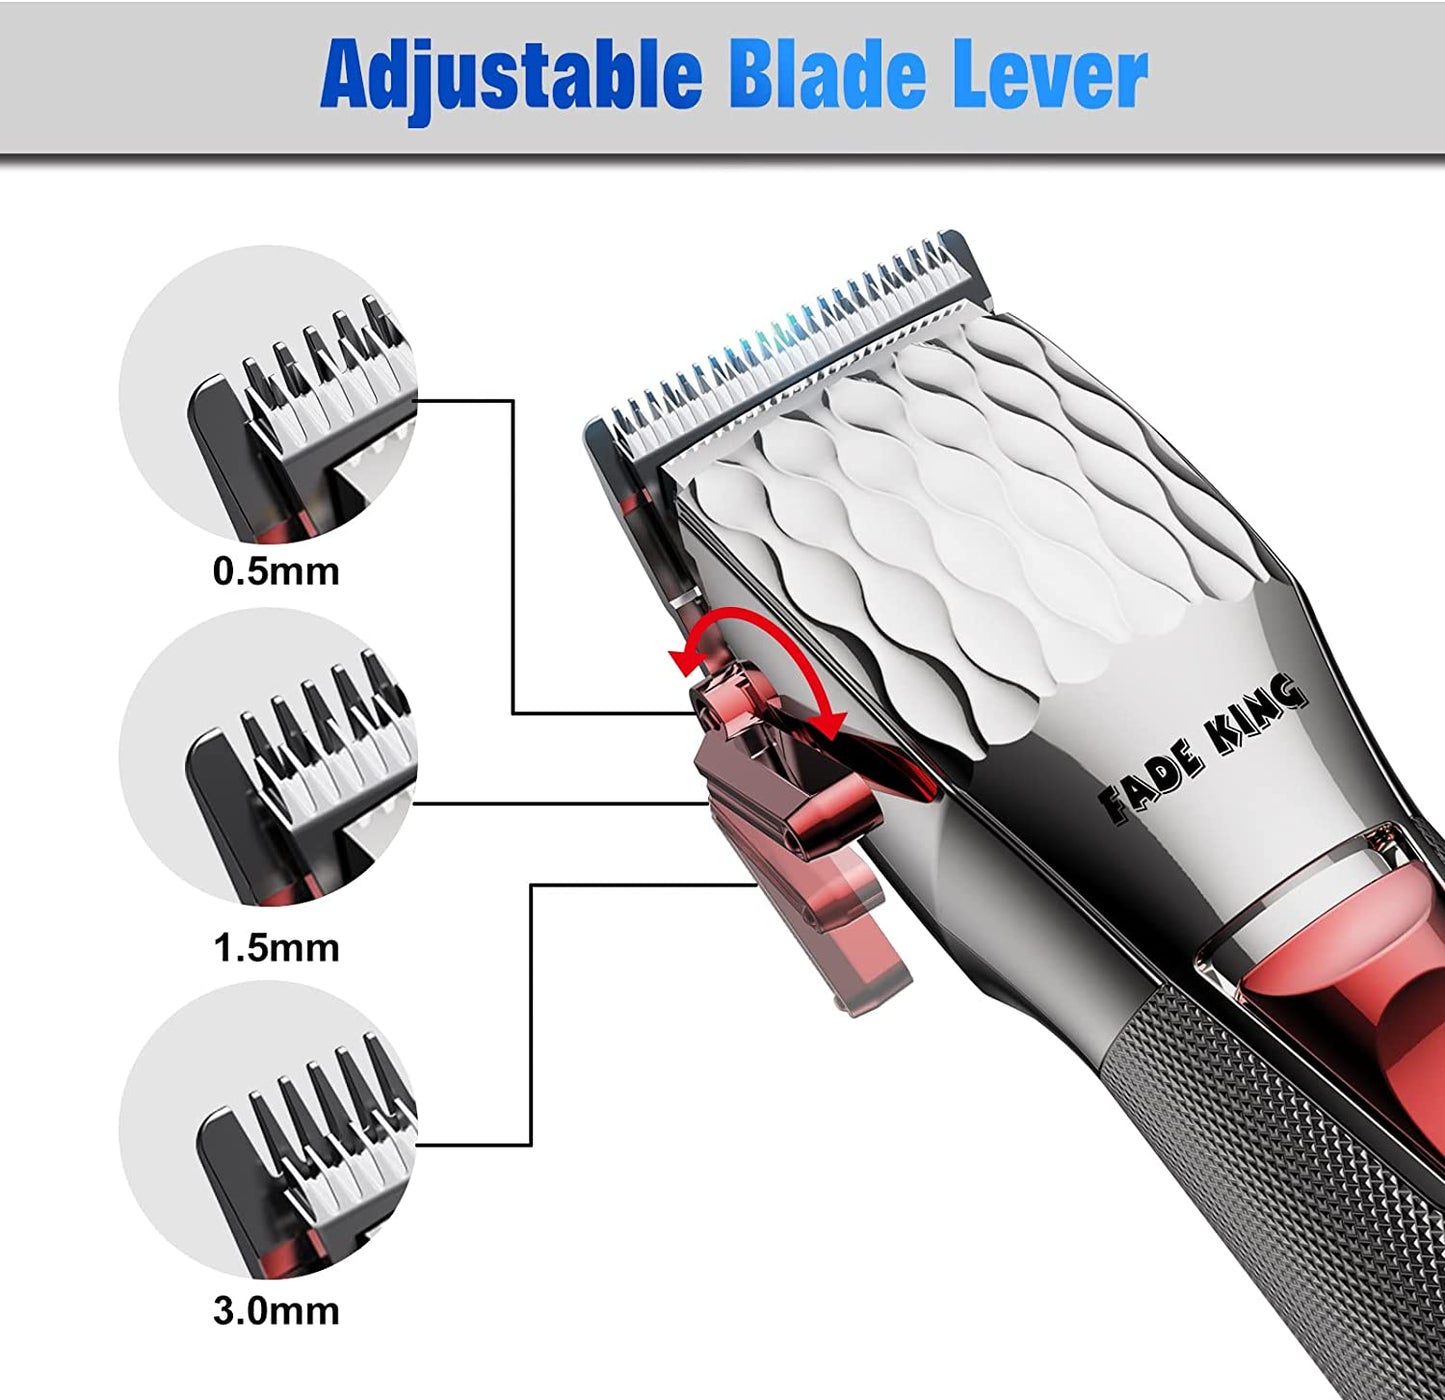 FADEKING Professional Hair Clippers for Men - Cordless Barber Clippers for Hair Cutting, Rechargeable Hair Beard Trimmer with LED Display & Quality Travel Storage Case (Red+Silver)